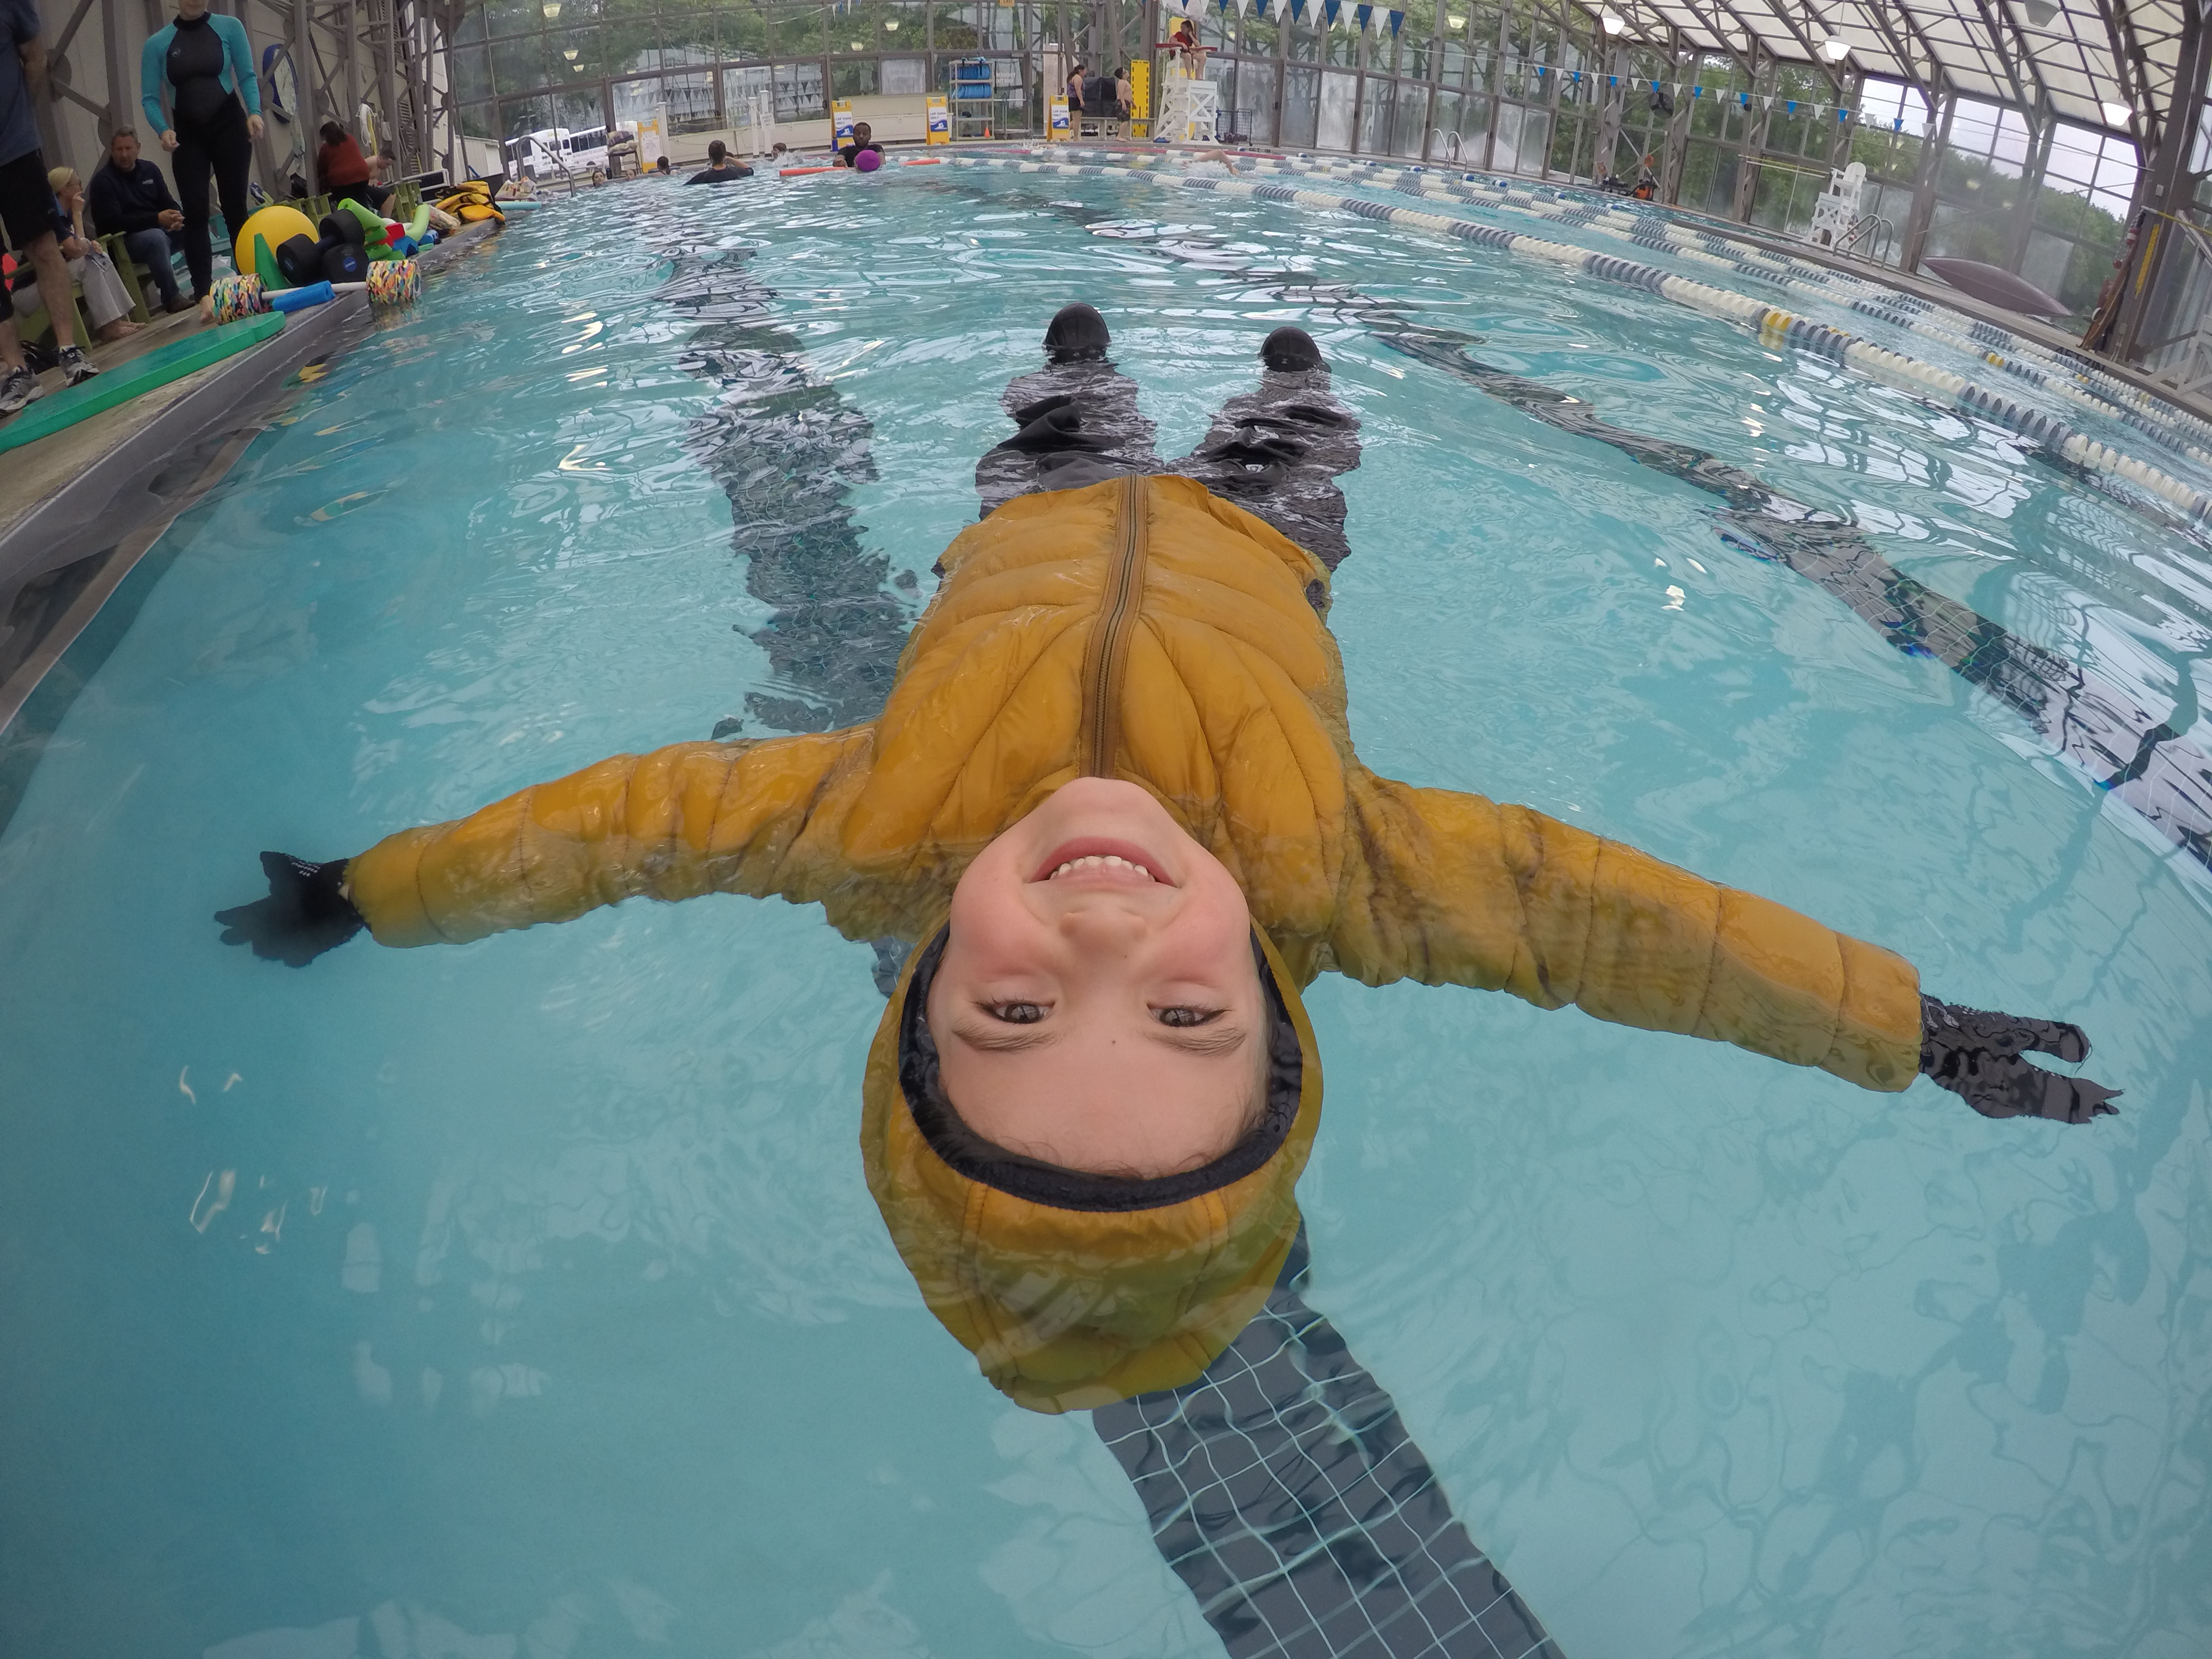 Connecticut life and style blogger Lauren McBride shares their experience with Survival Swim Lessons, including Q&A and information about their overall experience.